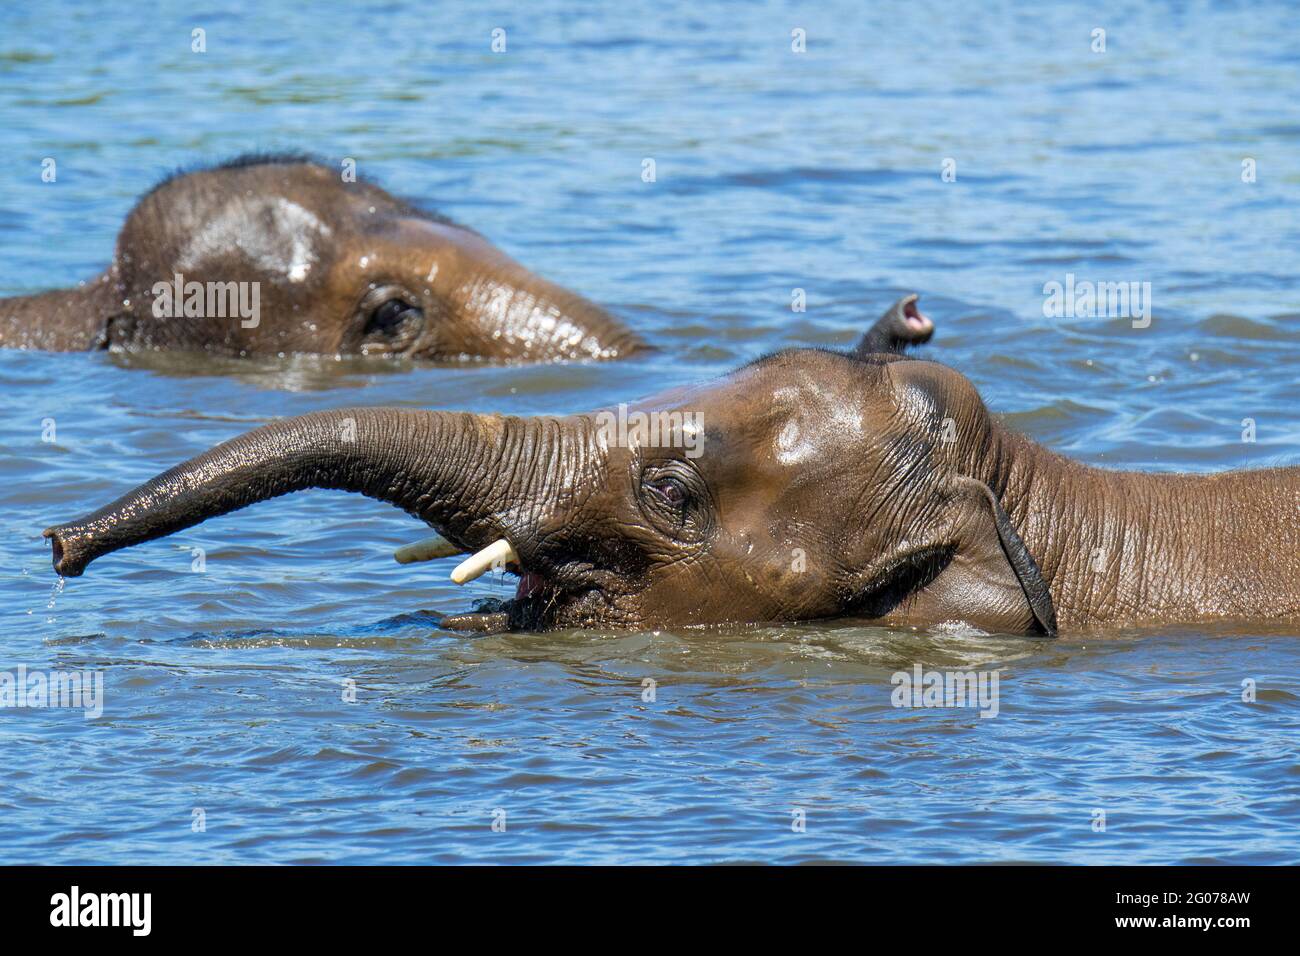 Two young Asian elephants / Asiatic elephant (Elephas maximus) juveniles having fun bathing and playing in water of river Stock Photo